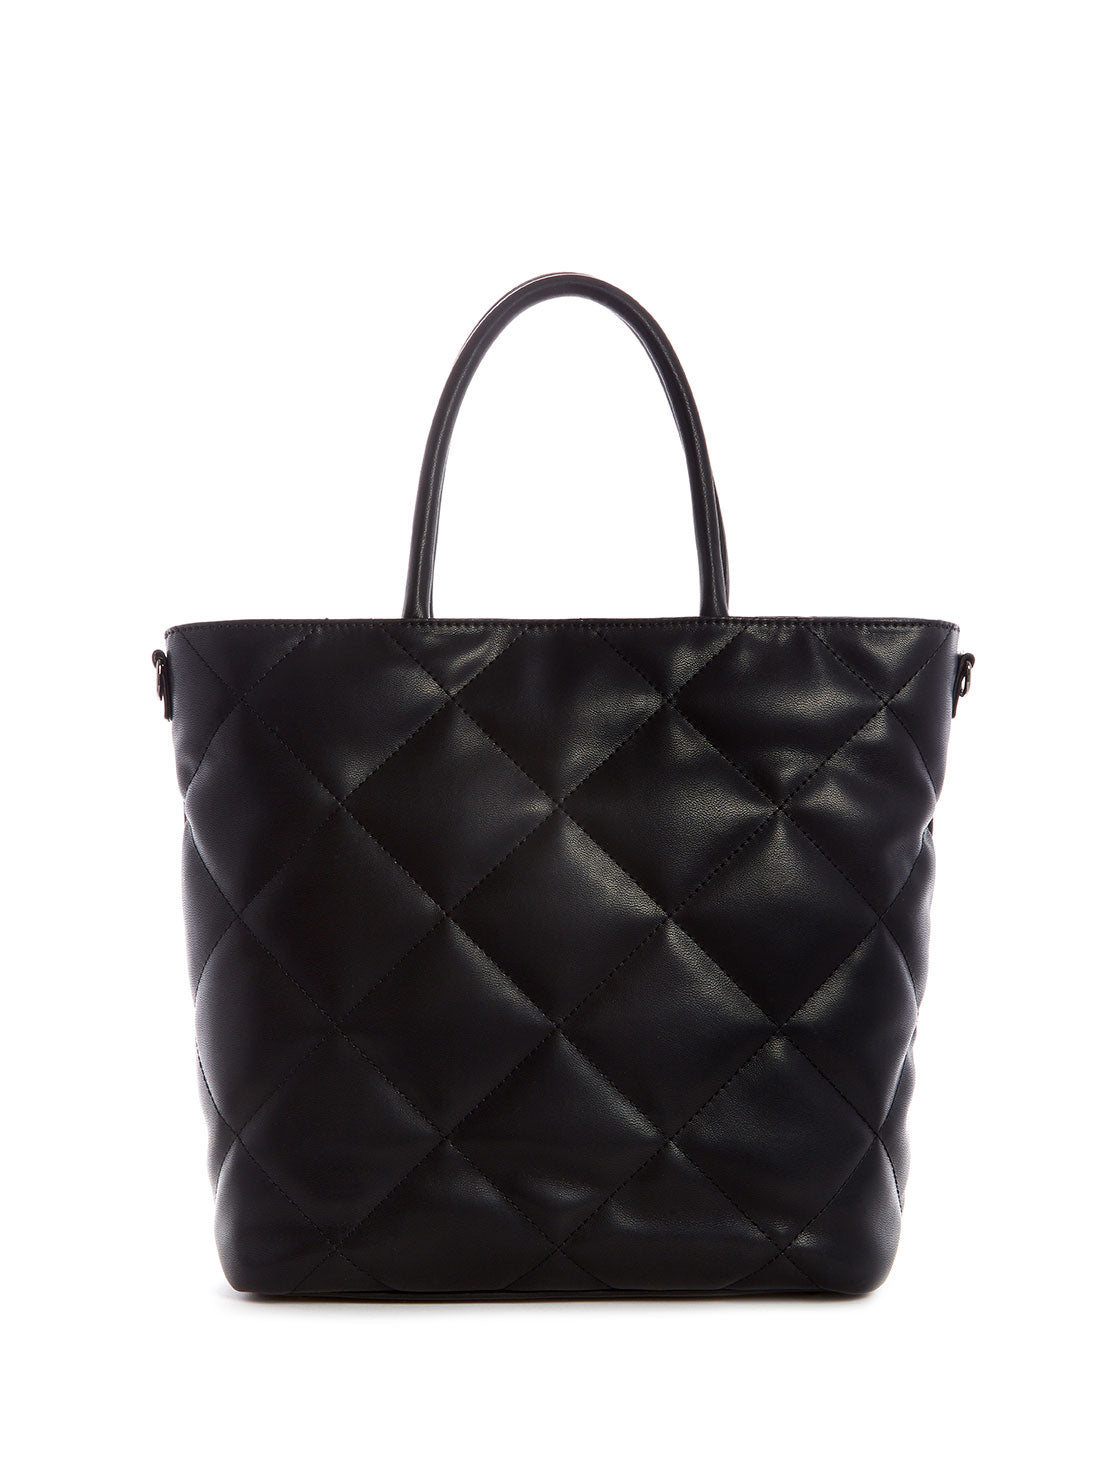 GUESS Womens Black Quilted Brightside Tote Bag QM758023 Back View